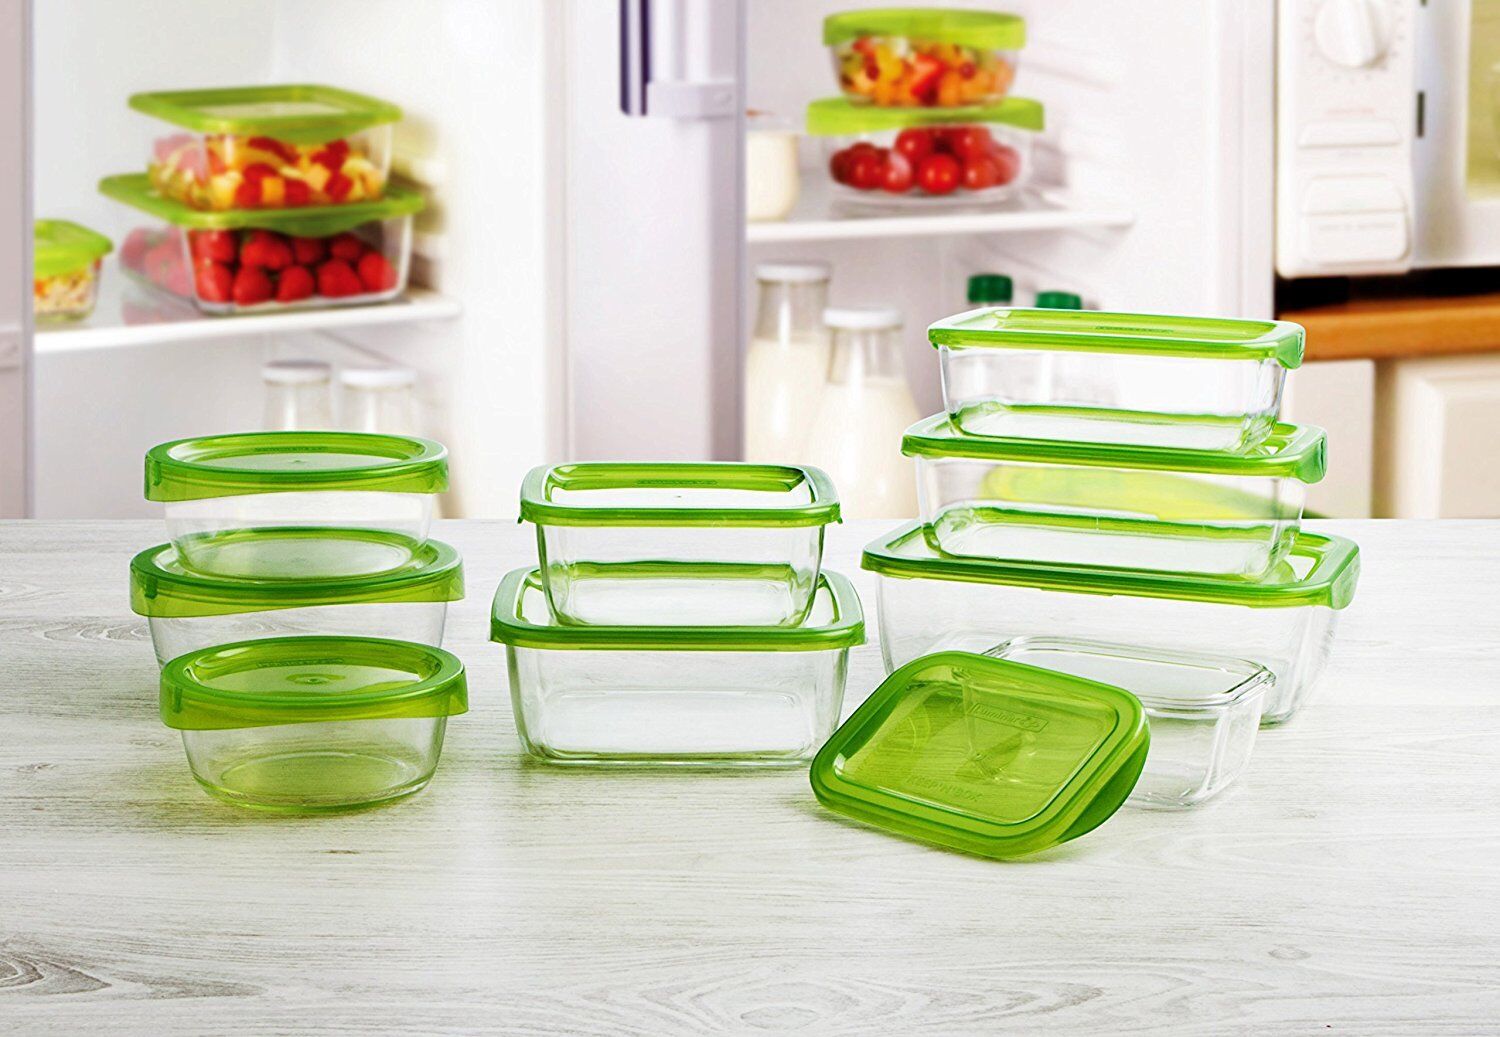 Glass containers are healthier than plastic ones